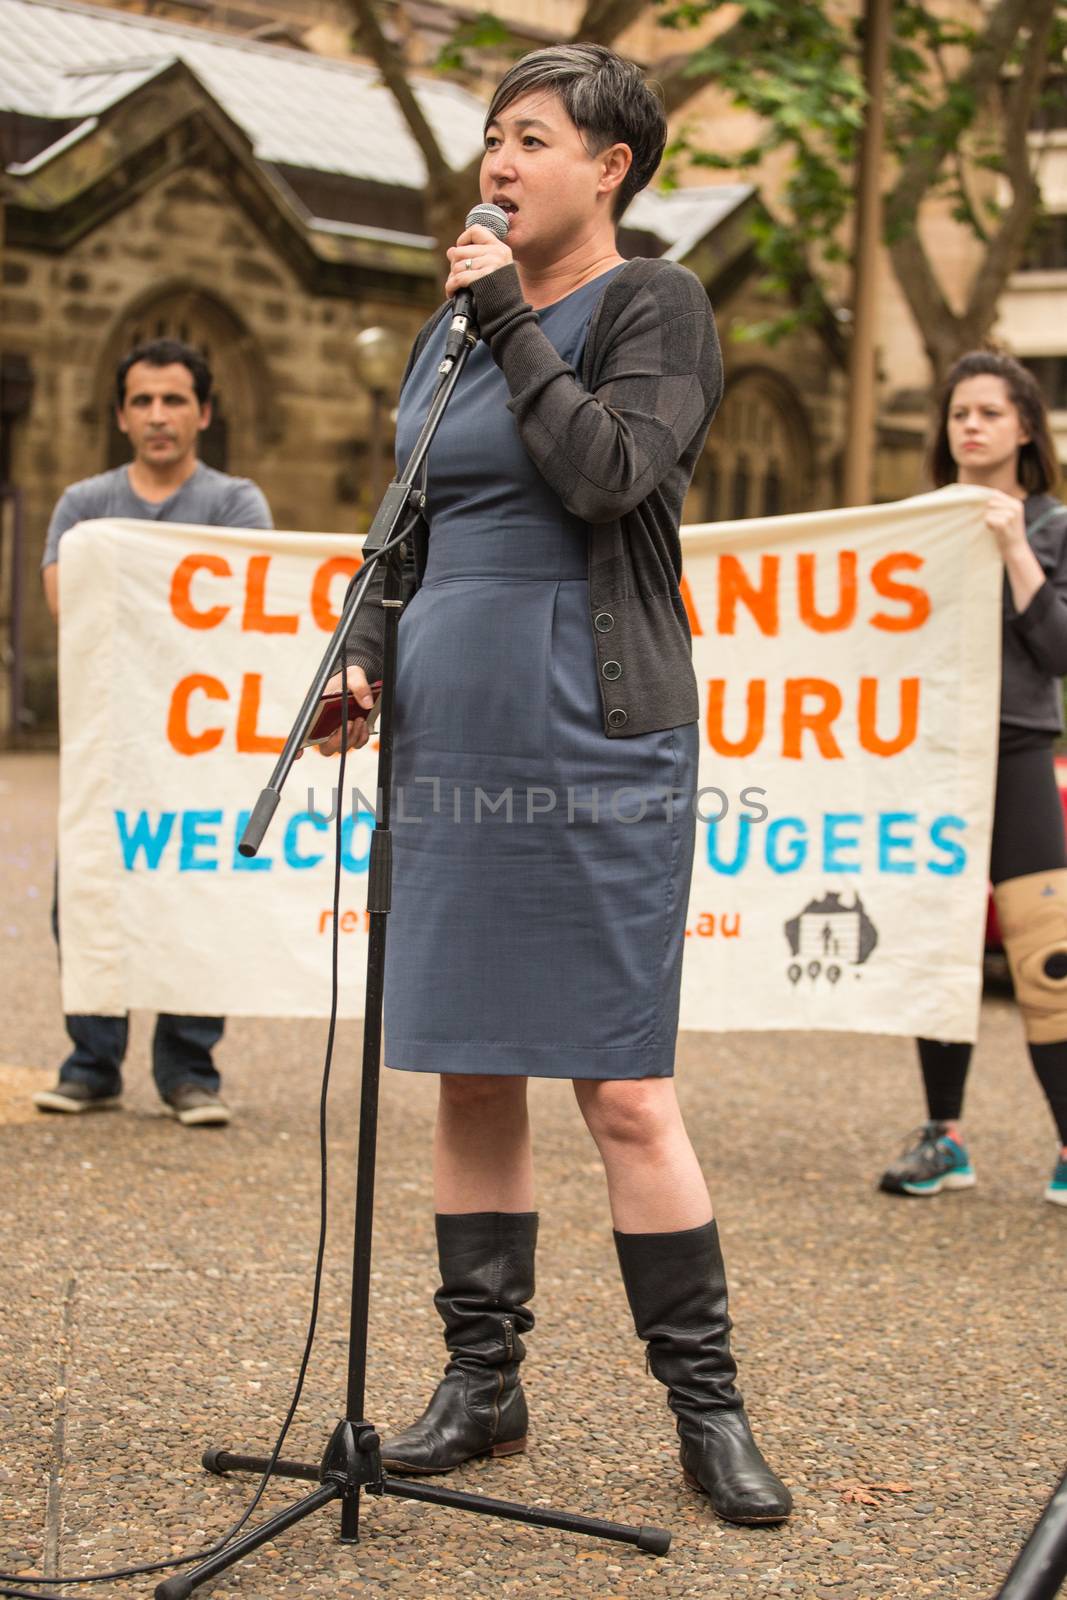 AUSTRALIA, Sydney: Greens MP Jenny Leong addresses supporters of a Somali refugee known as Abyan during a rally at Town Hall Square in Sydney on October 23, 2015. After allegedly being raped at Nauru detention center, Abyan was flown to Australia to have an abortion, which she was then reportedly denied before being deported back to Nauru. Immigration Minister Peter Dutton has said that Abyan changed her mind about the abortion, and upon her request could be flown back to Australia for the procedure.